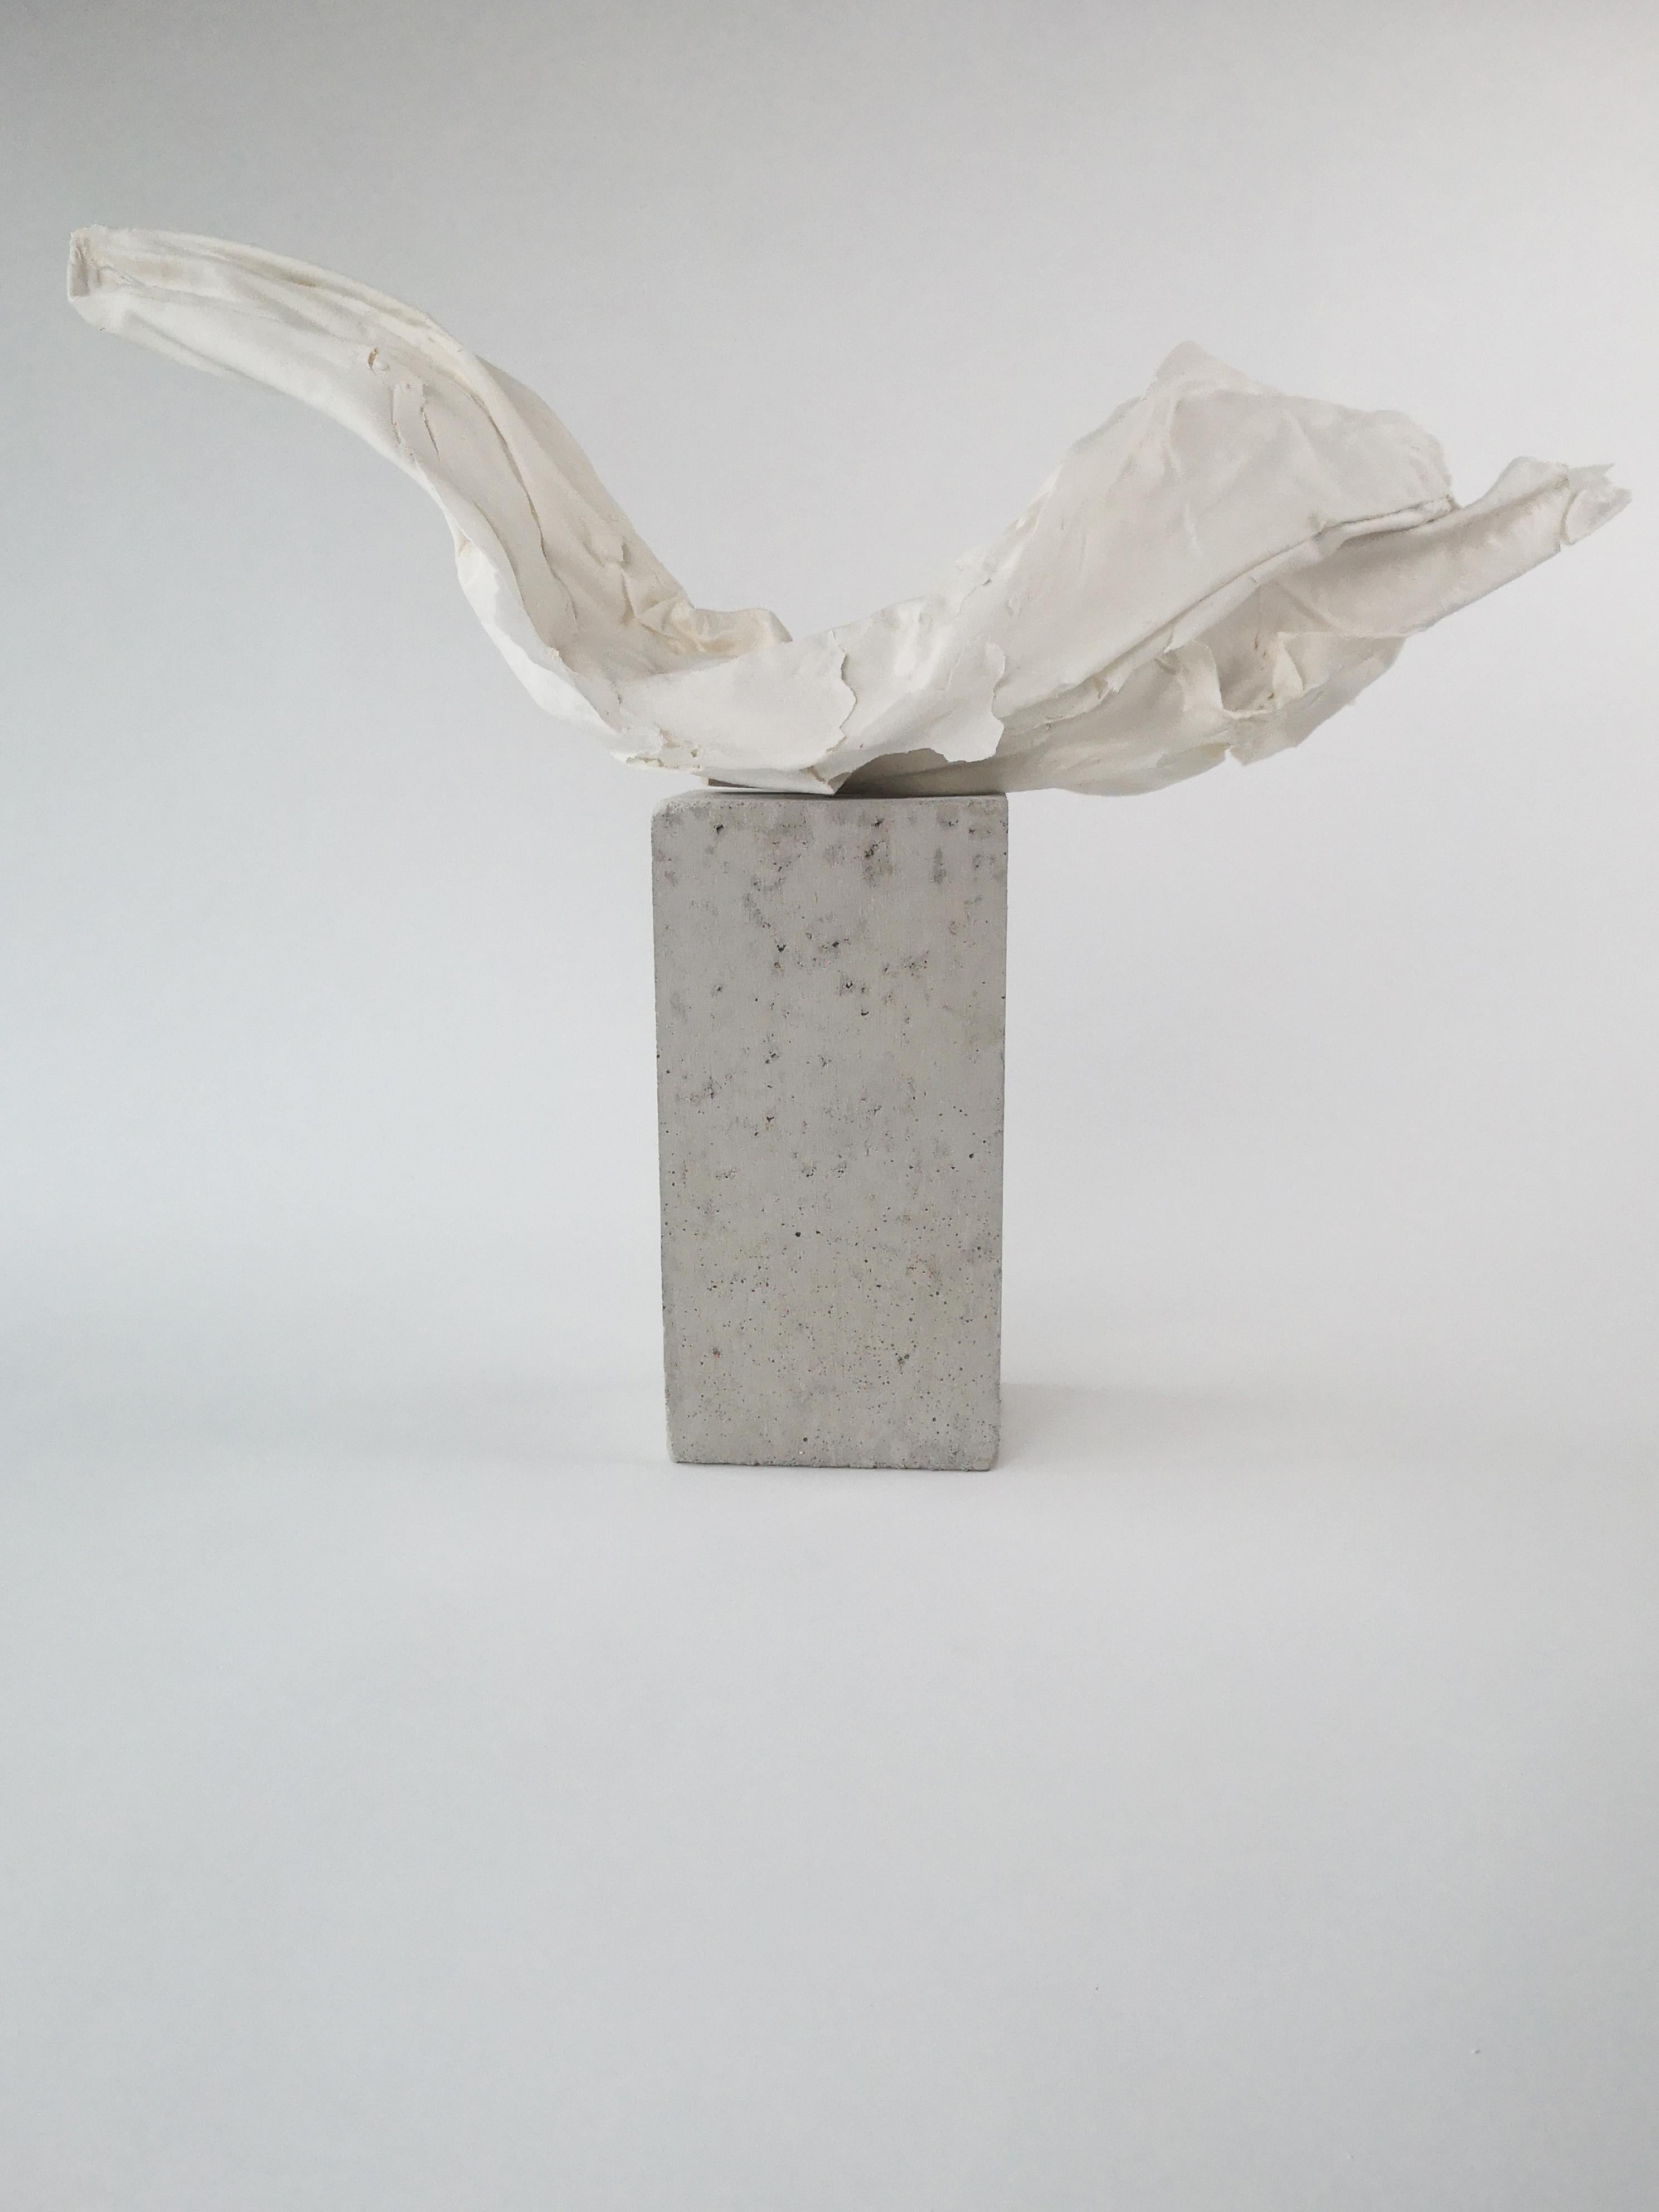 Fold I Sculpture by Dora Stanczel
One of a Kind.
Dimensions: D 15 x W 50 x H 37 cm.
Materials: Porcelain and beton pedestal.

I create bespoke and luxurious porcelain pieces with a careful aesthetic. Beyond the technical mastery of casting, what